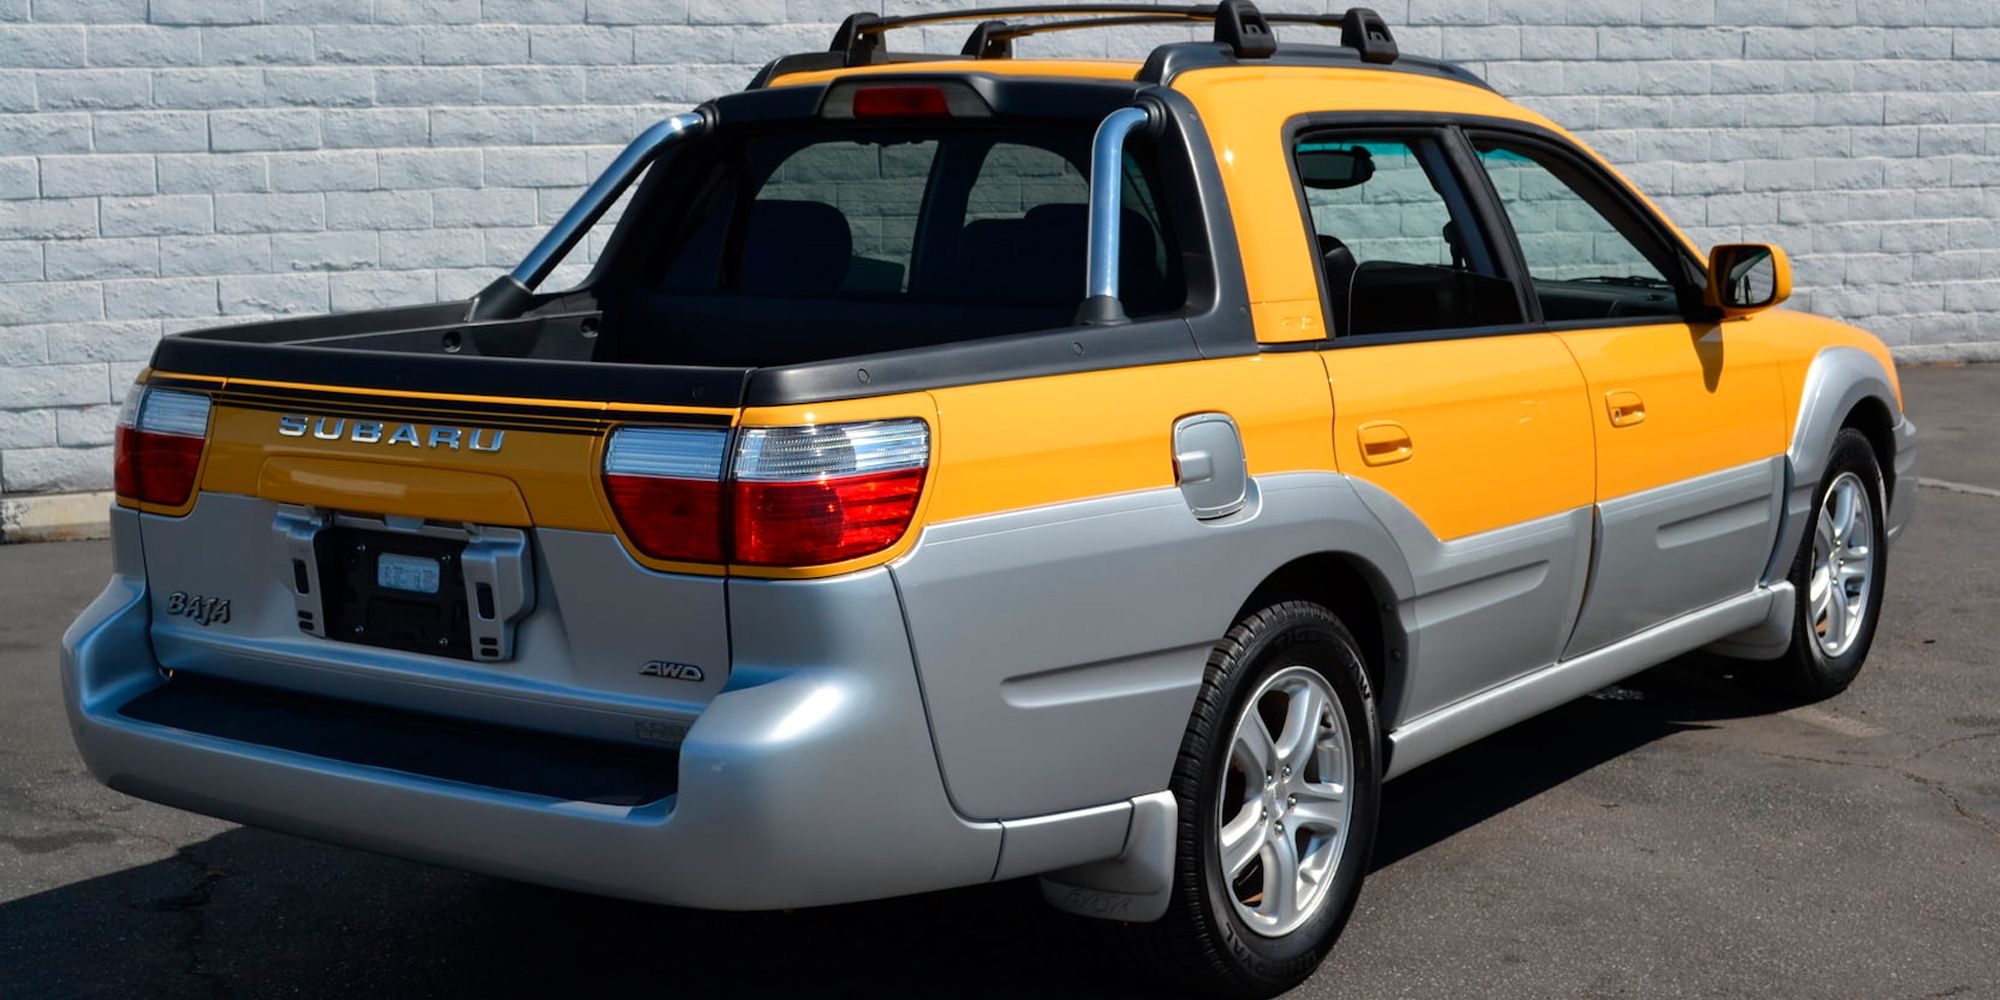 A two-tone yellow and silver Baja